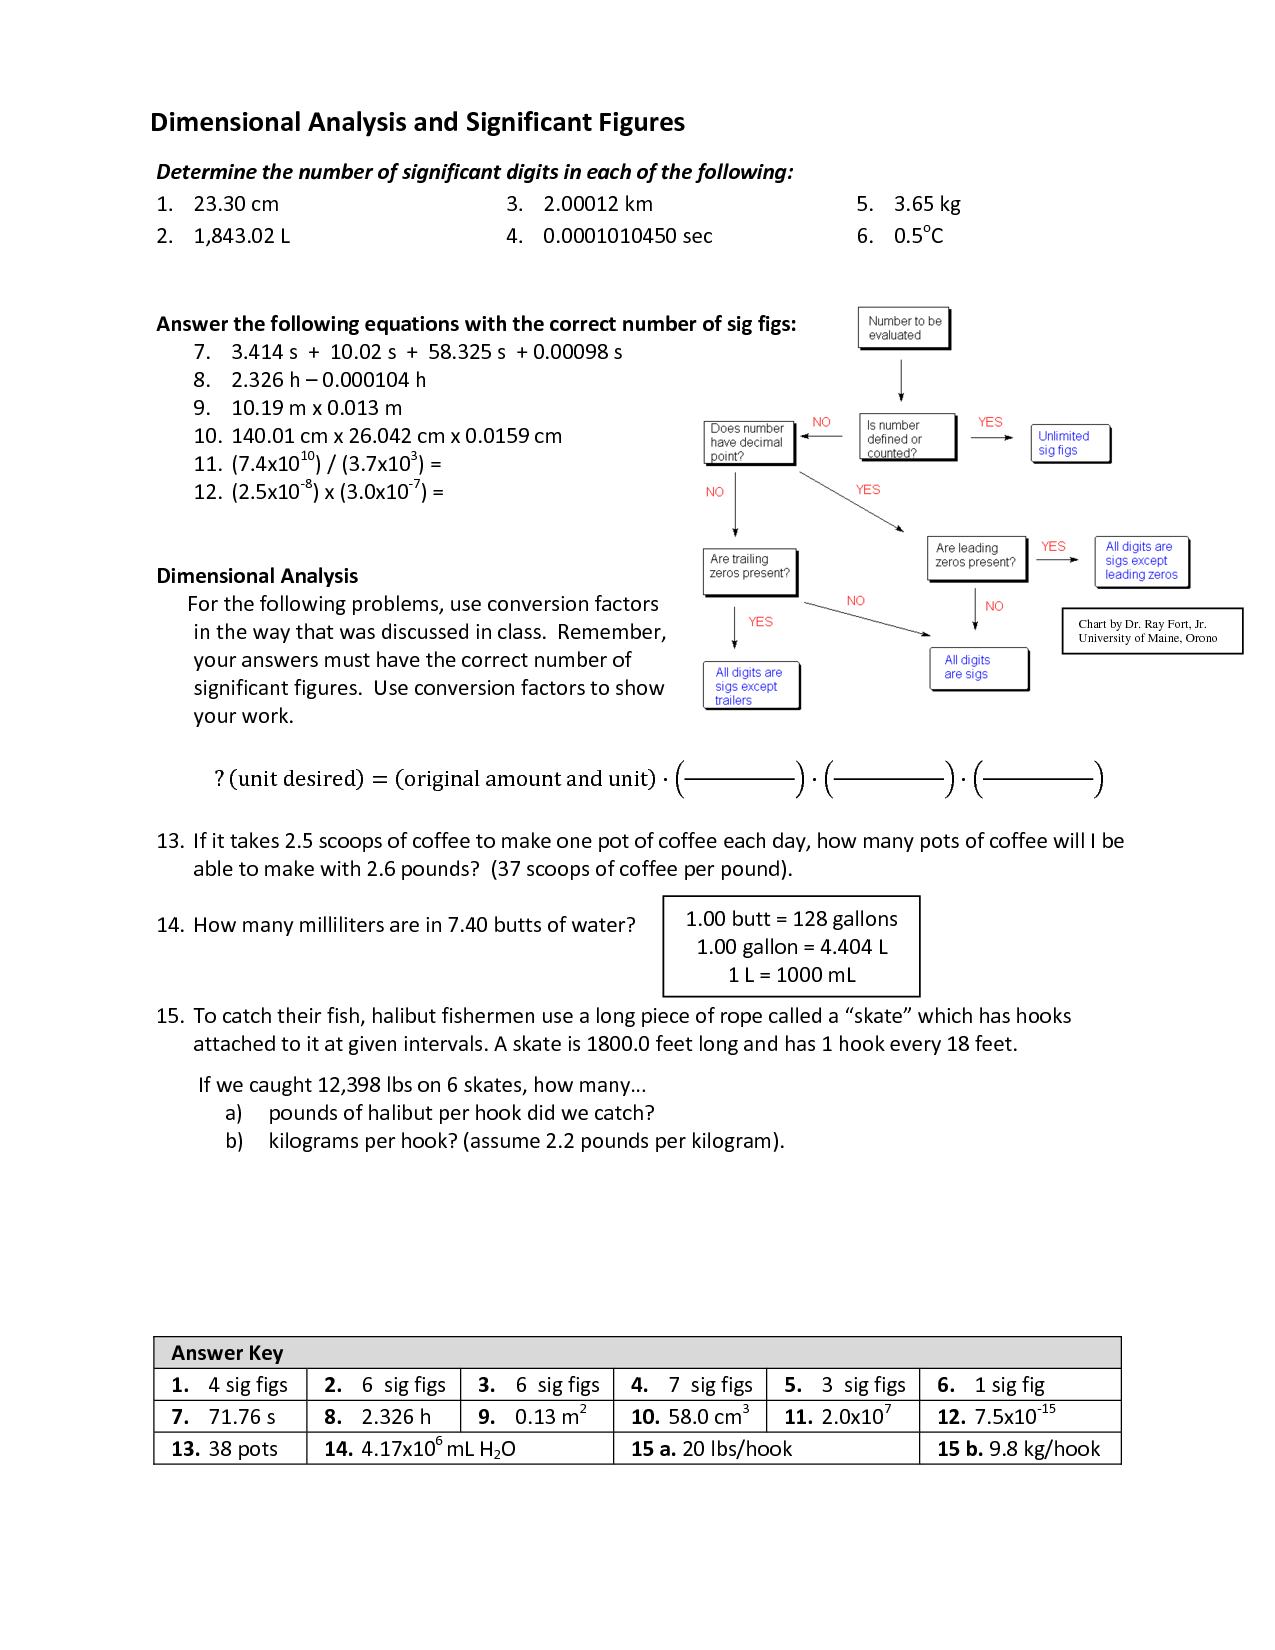 Dimensional Analysis Practice Problems Answers